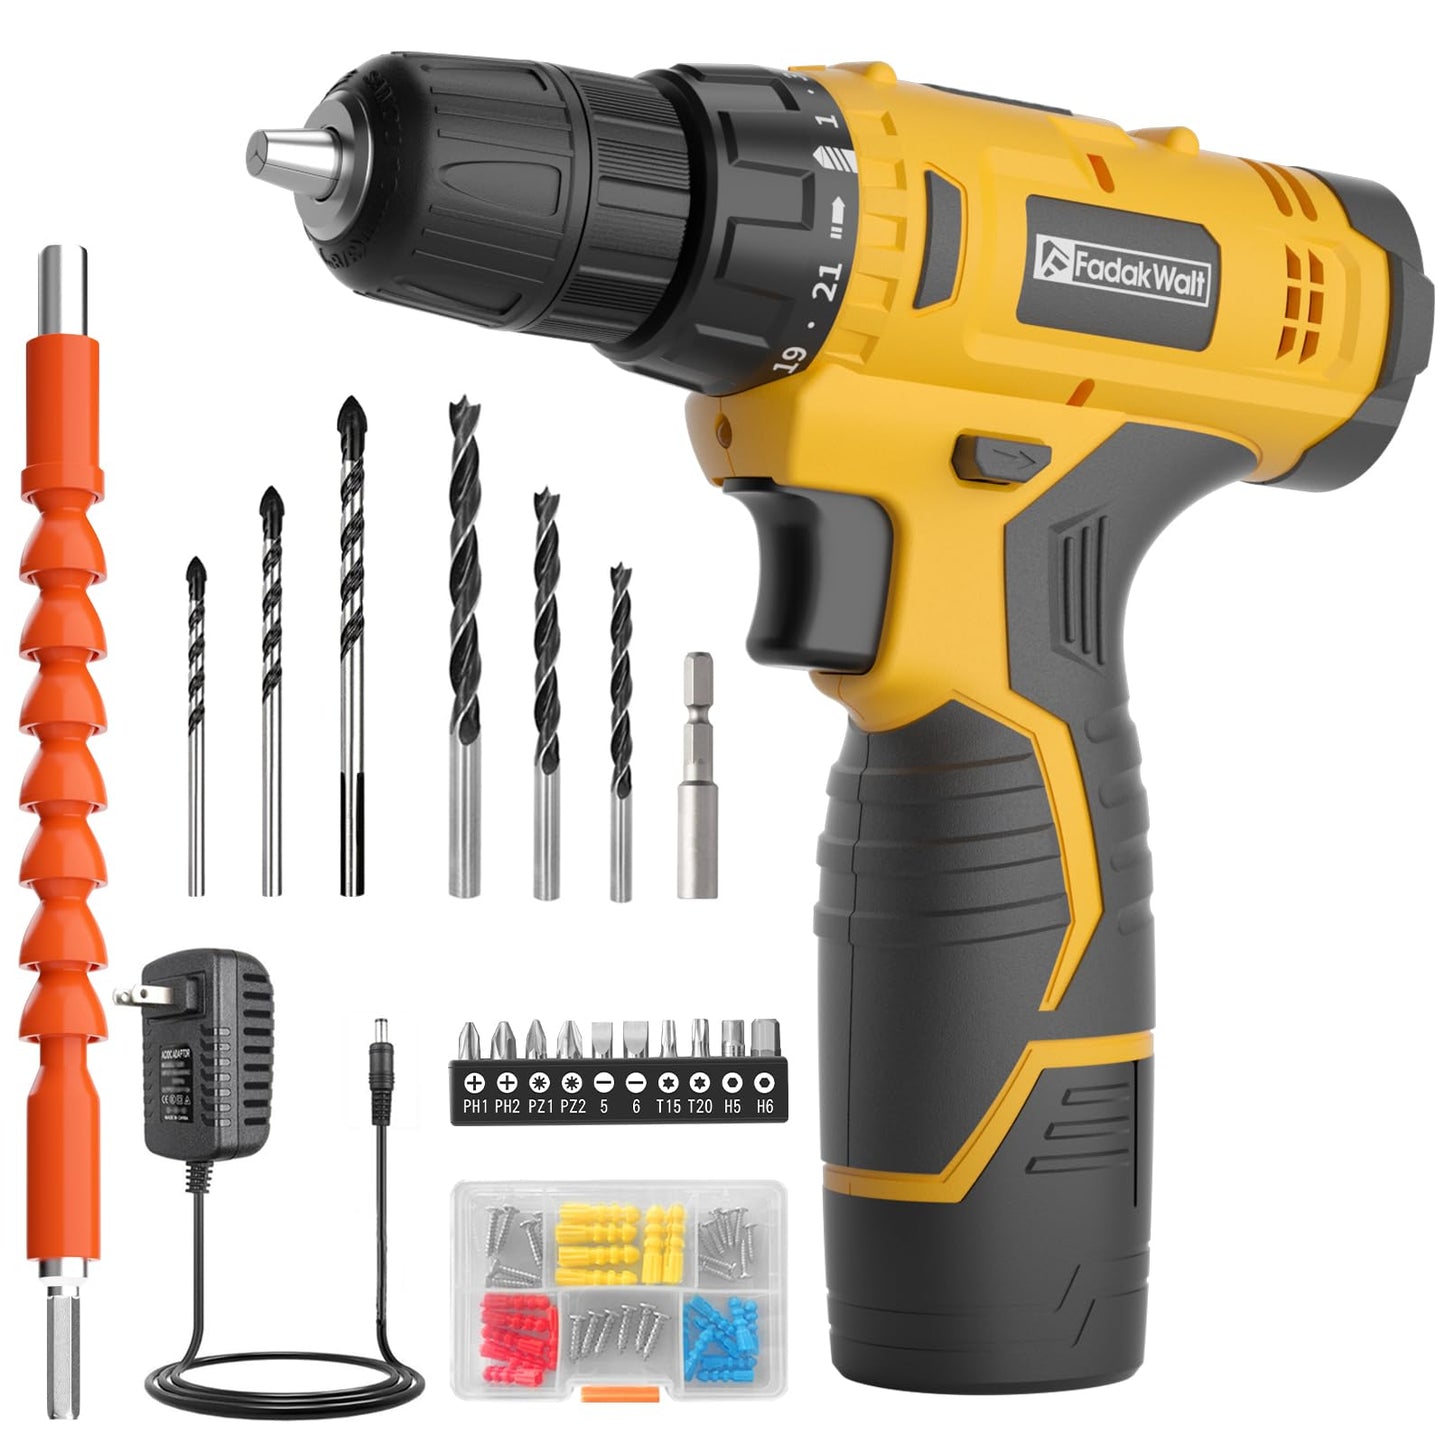 FADAKWALT Cordless Drill Set,12V Power Drill Set with Battery and Charger, compact Driver/Drill Bits, 3/8'' Keyless Chuck,21+1 Torque Setting, 180